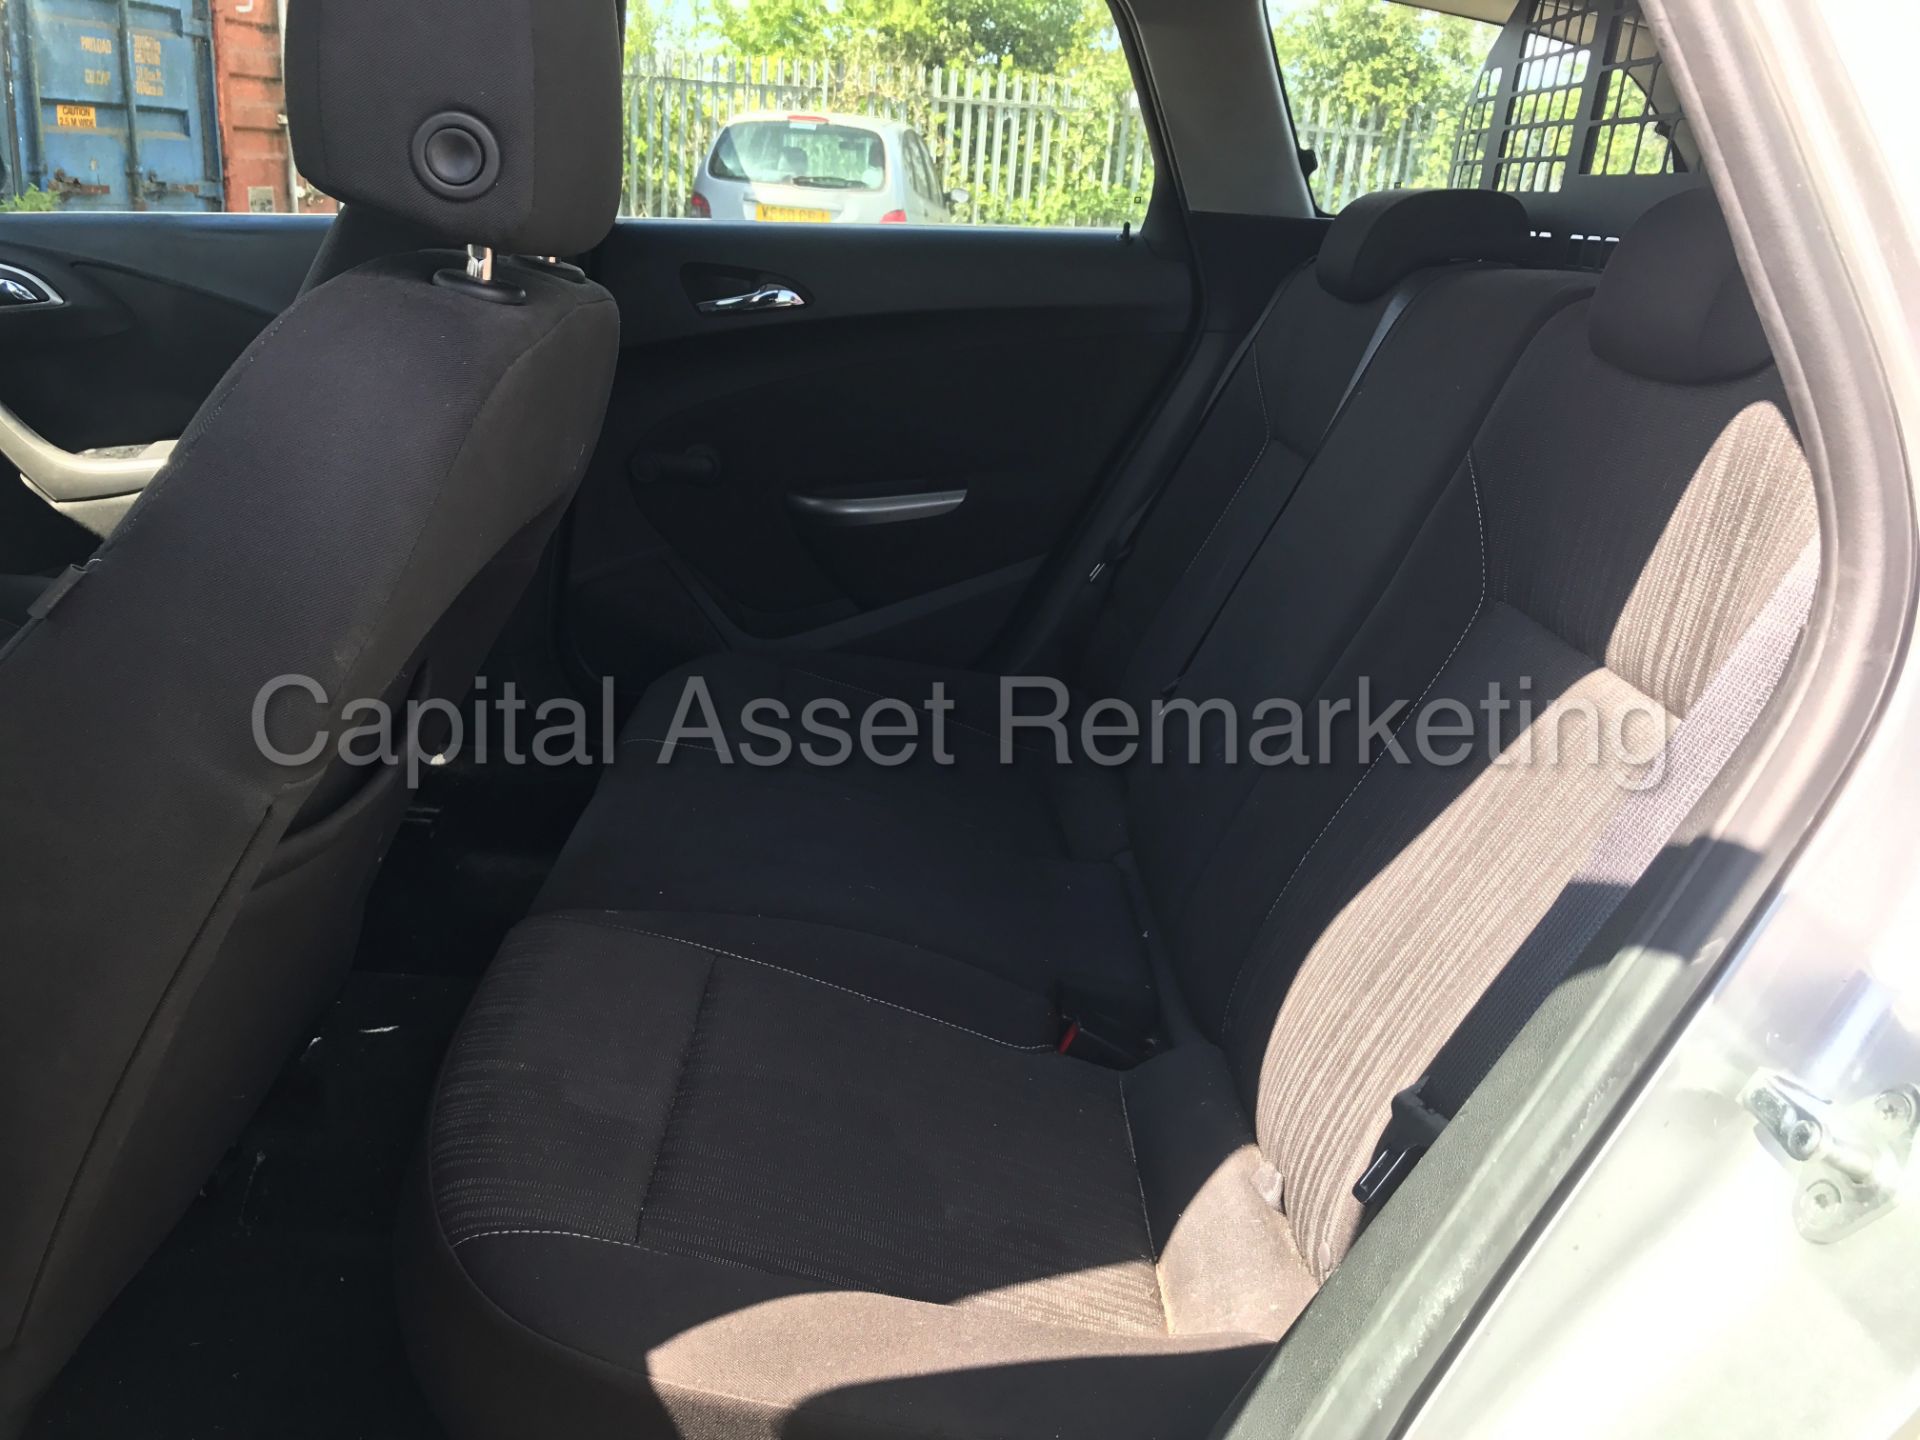 VAUXHALL ASTRA 'EXCLUSIVE' (2012 MODEL) '1.7 CDTI - ECOFLEX - 6 SPEED' **AIR CON** (1 OWNER) - Image 22 of 25